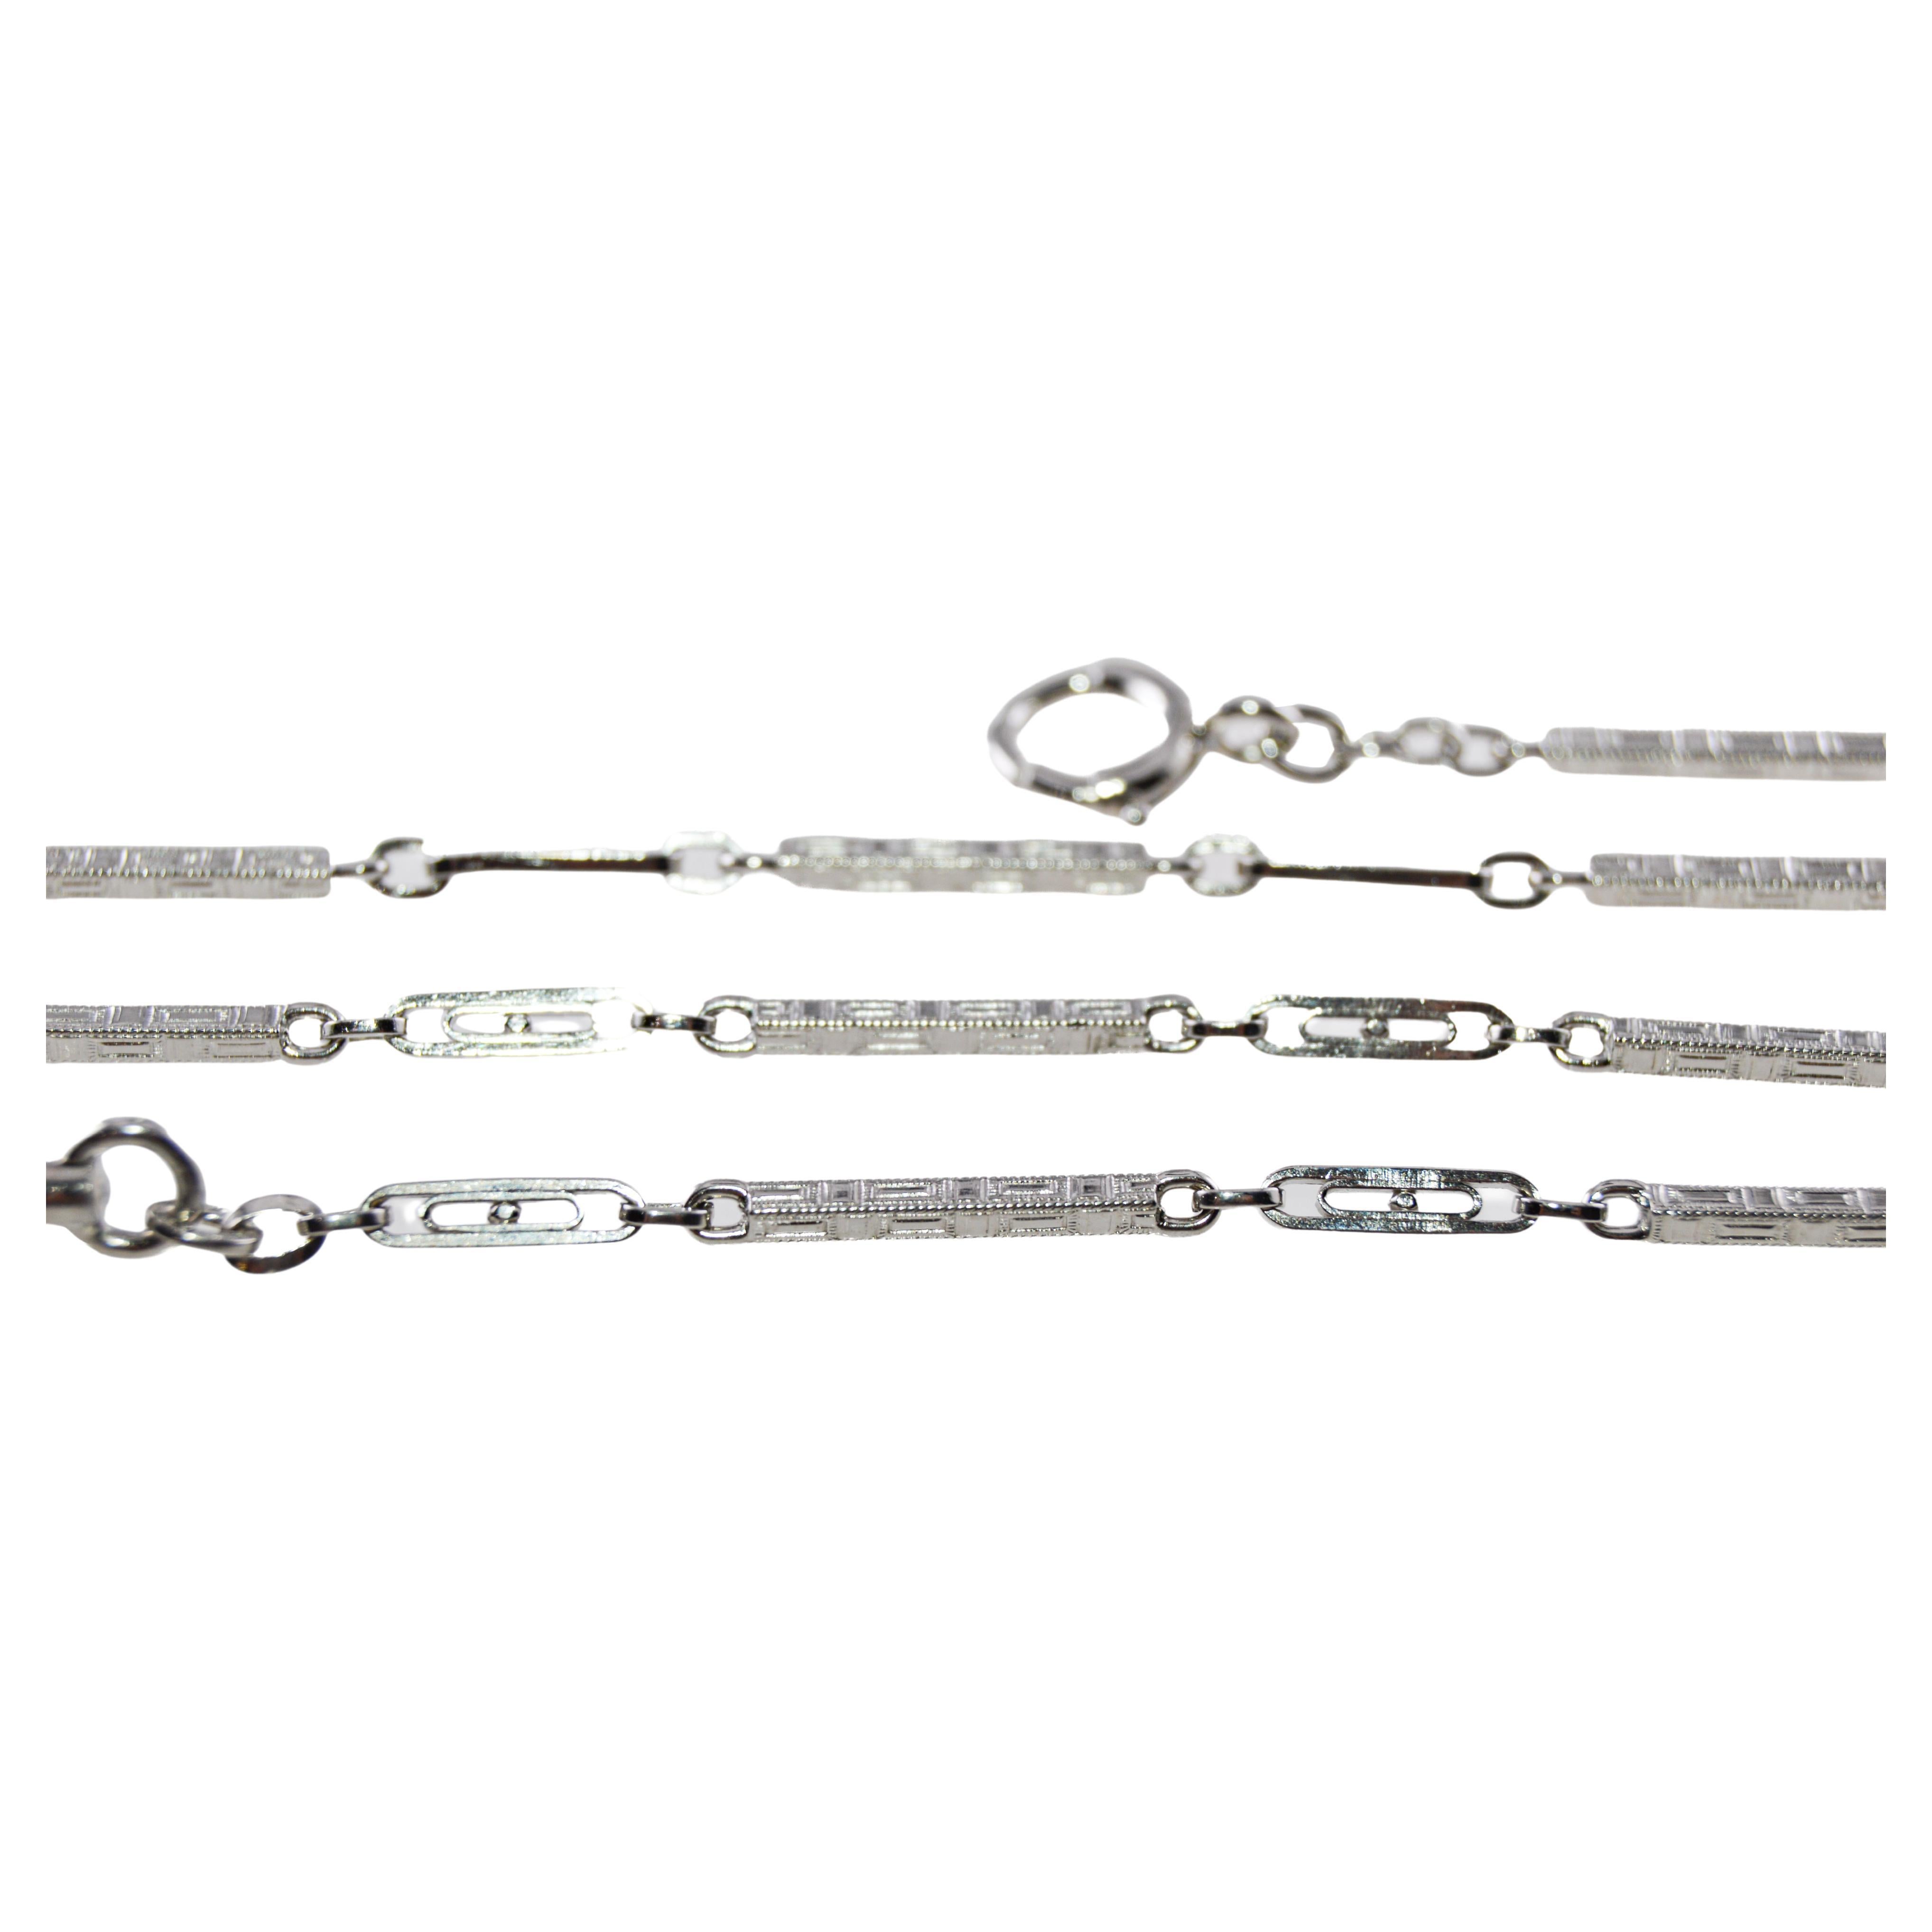 METAL / MATERIAL: 14Kt White Gold
CIRCA / YEAR: 1920's or 30's 
ATTACHMENT / LENGTH: 13.5 Inches in Length

This is a great looking hand made necklace or bracelet, or a pocket watch chain. Each link is hand constructed with alternating links. We